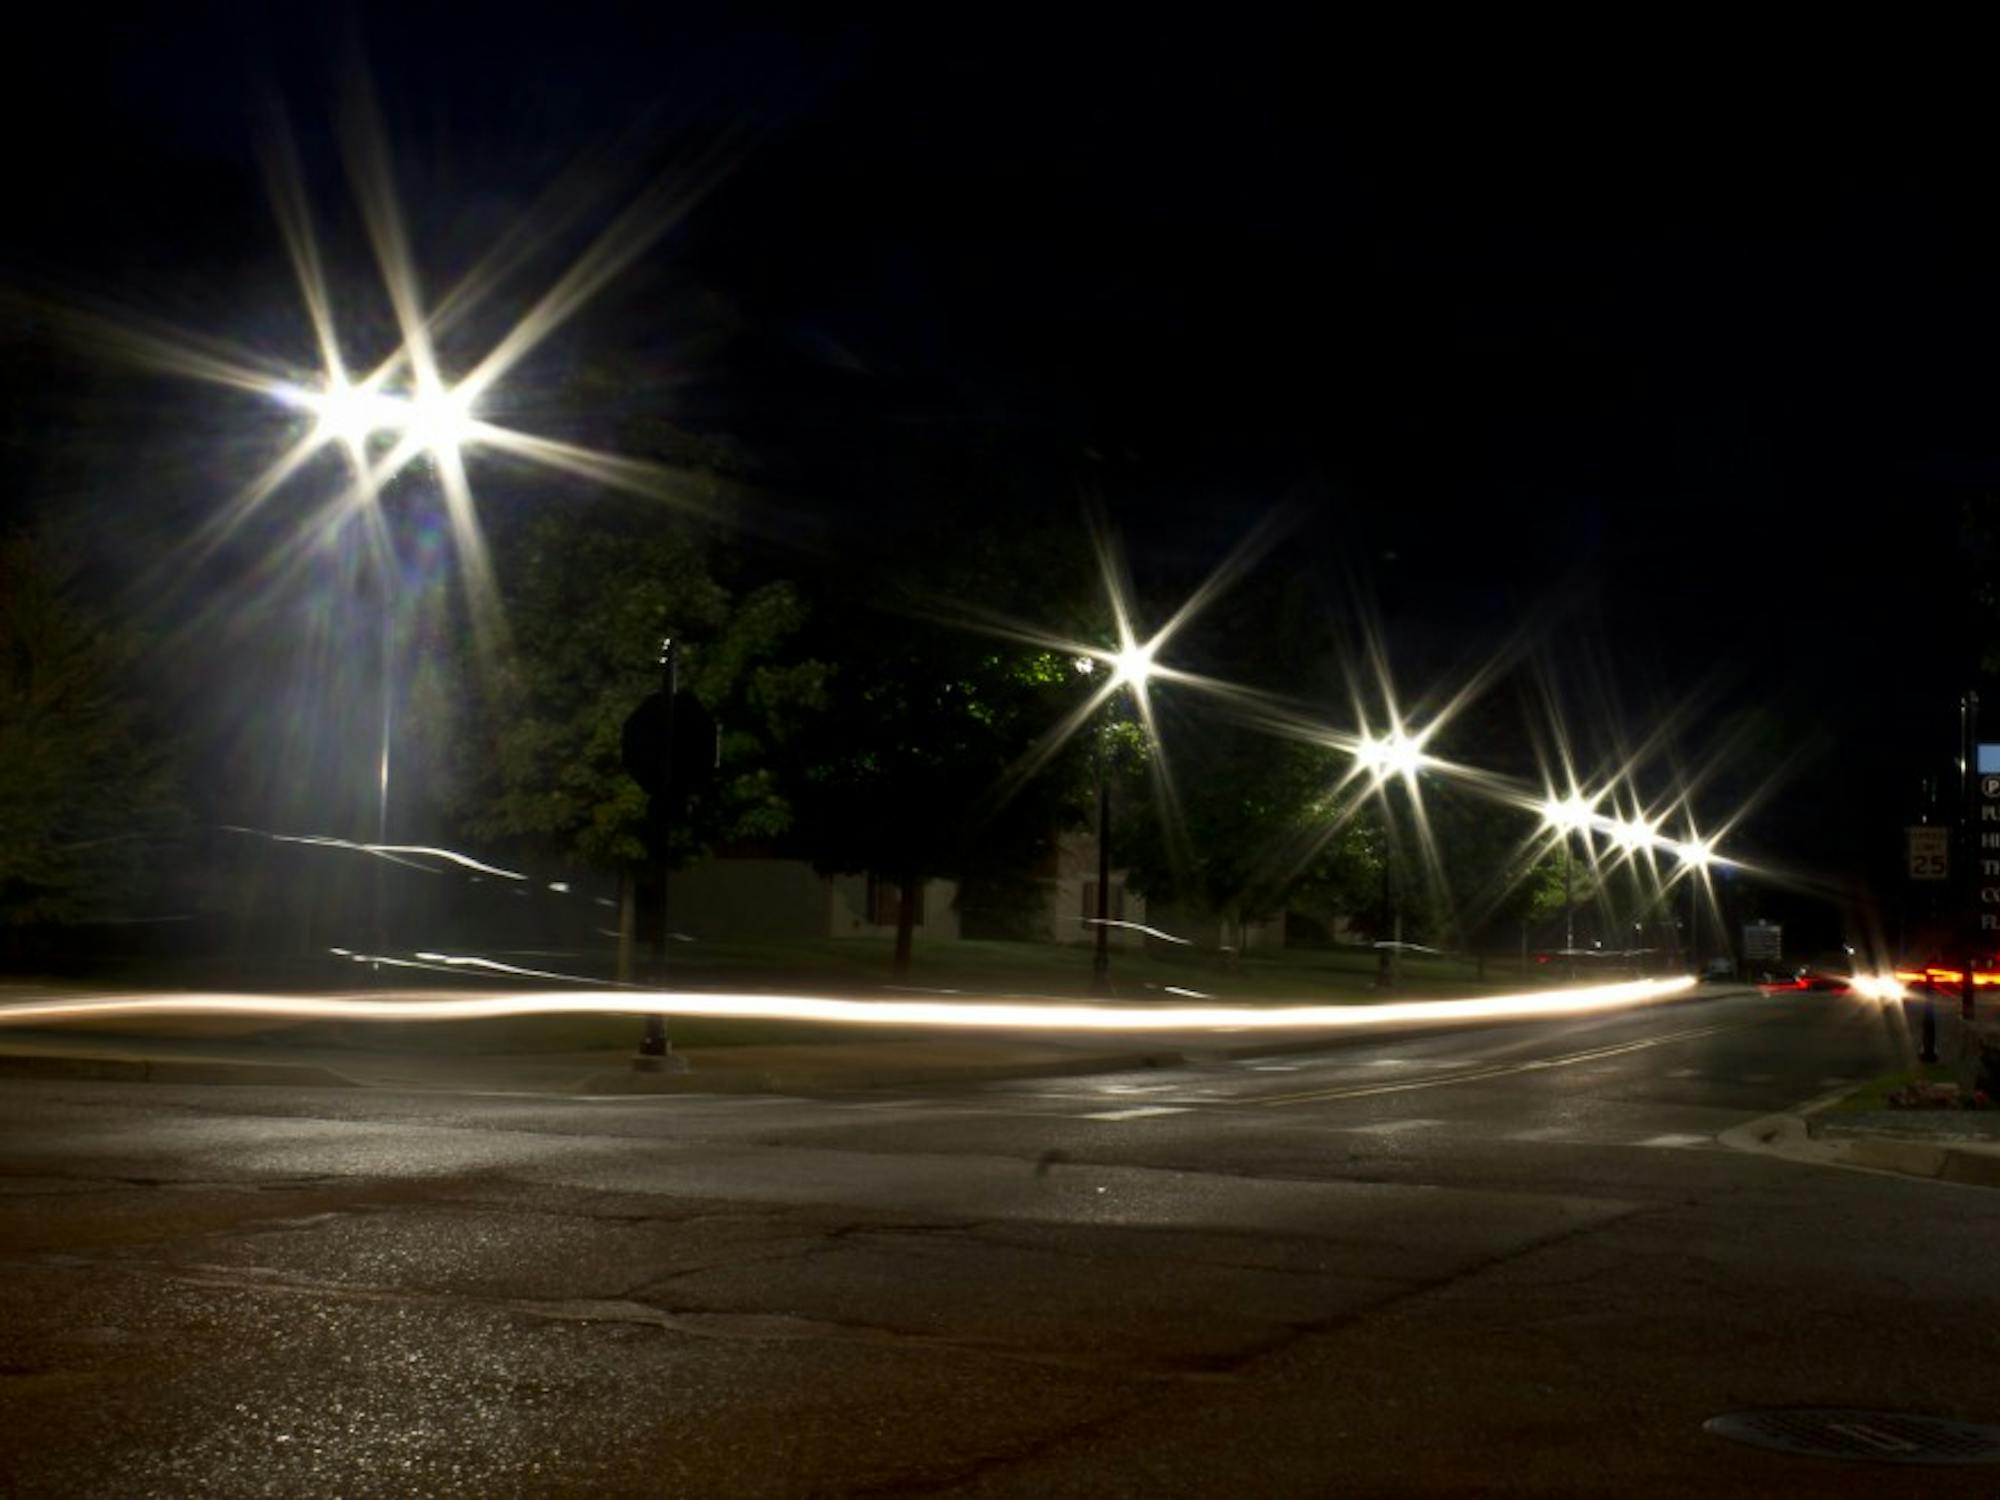 Investment in new lights adds safety to EMU and Ypsilanti